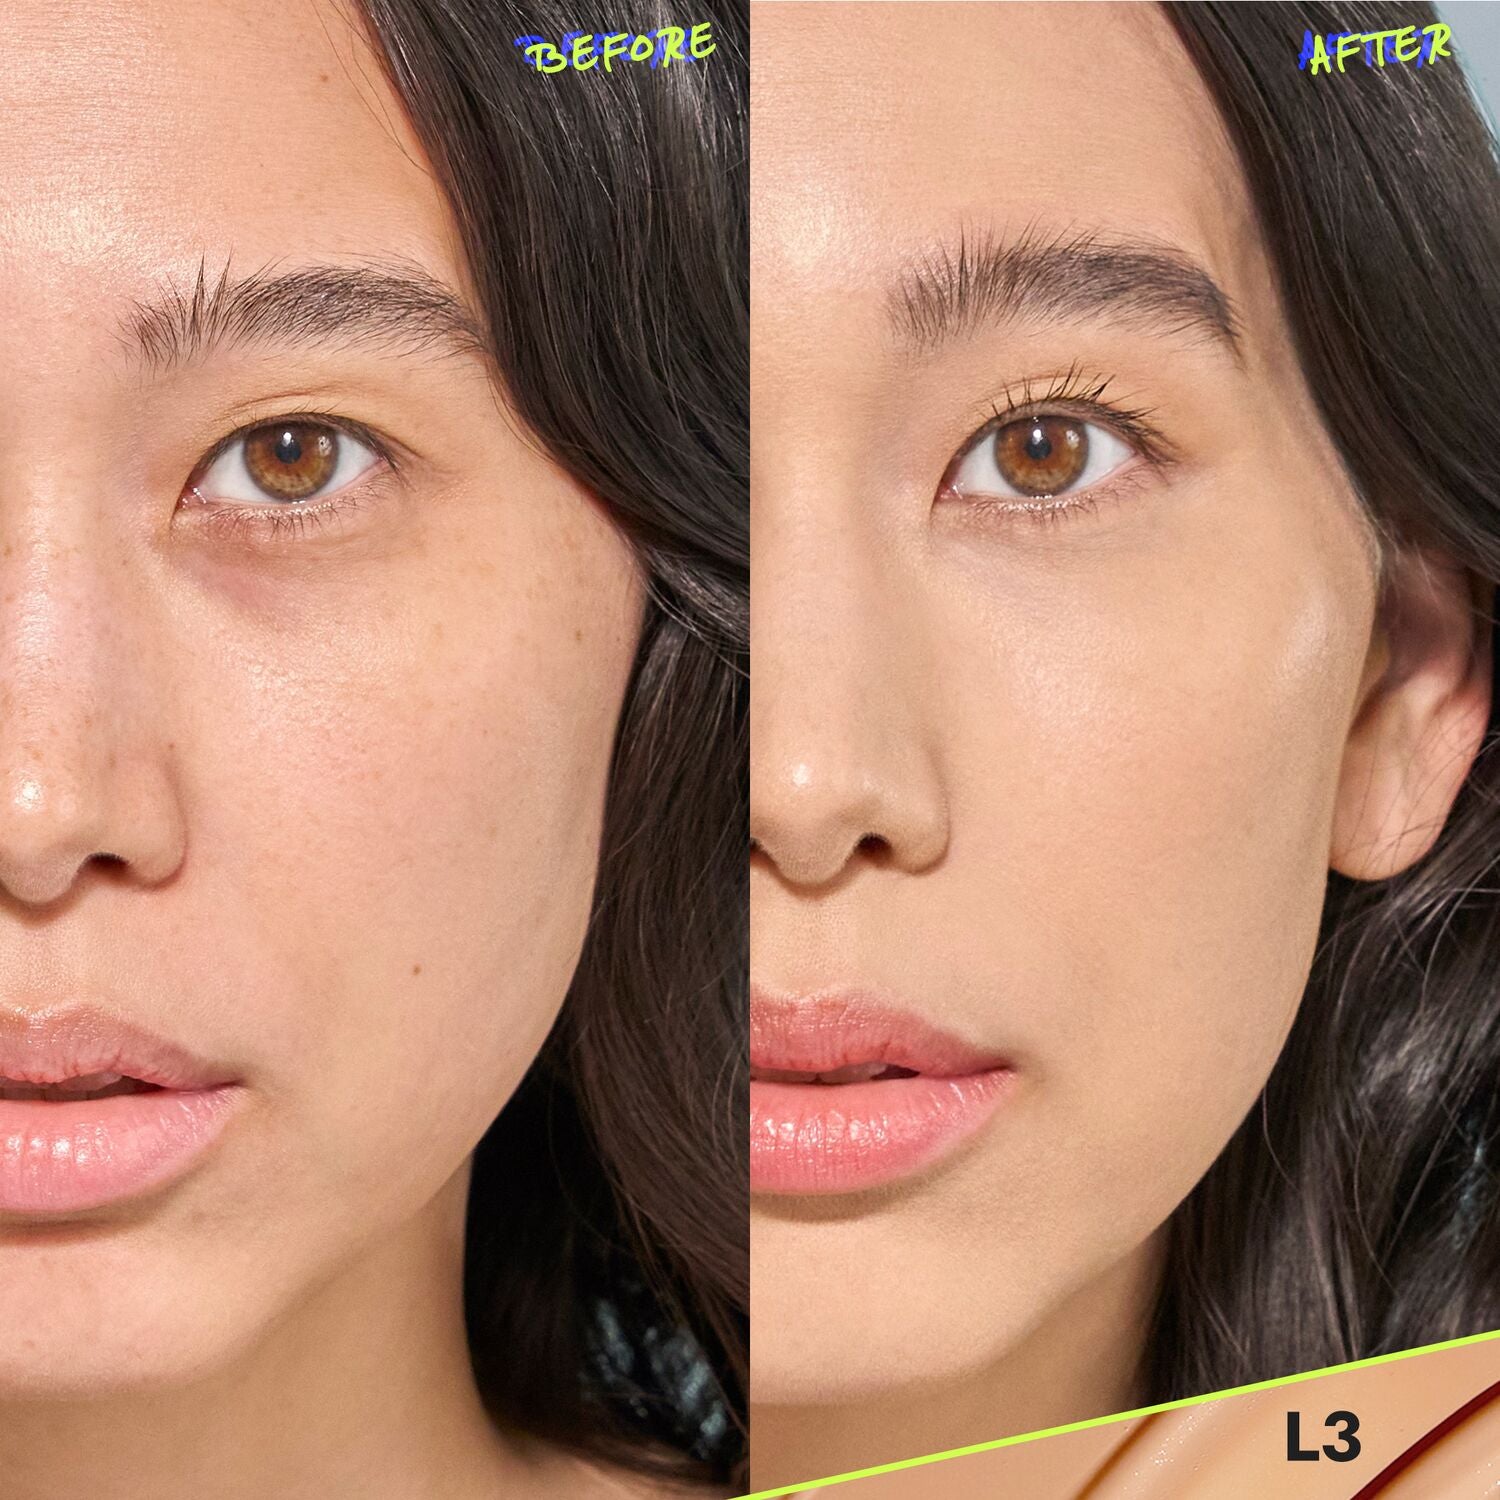 CoverFX Power Play Foundation before and after model image in shade L3